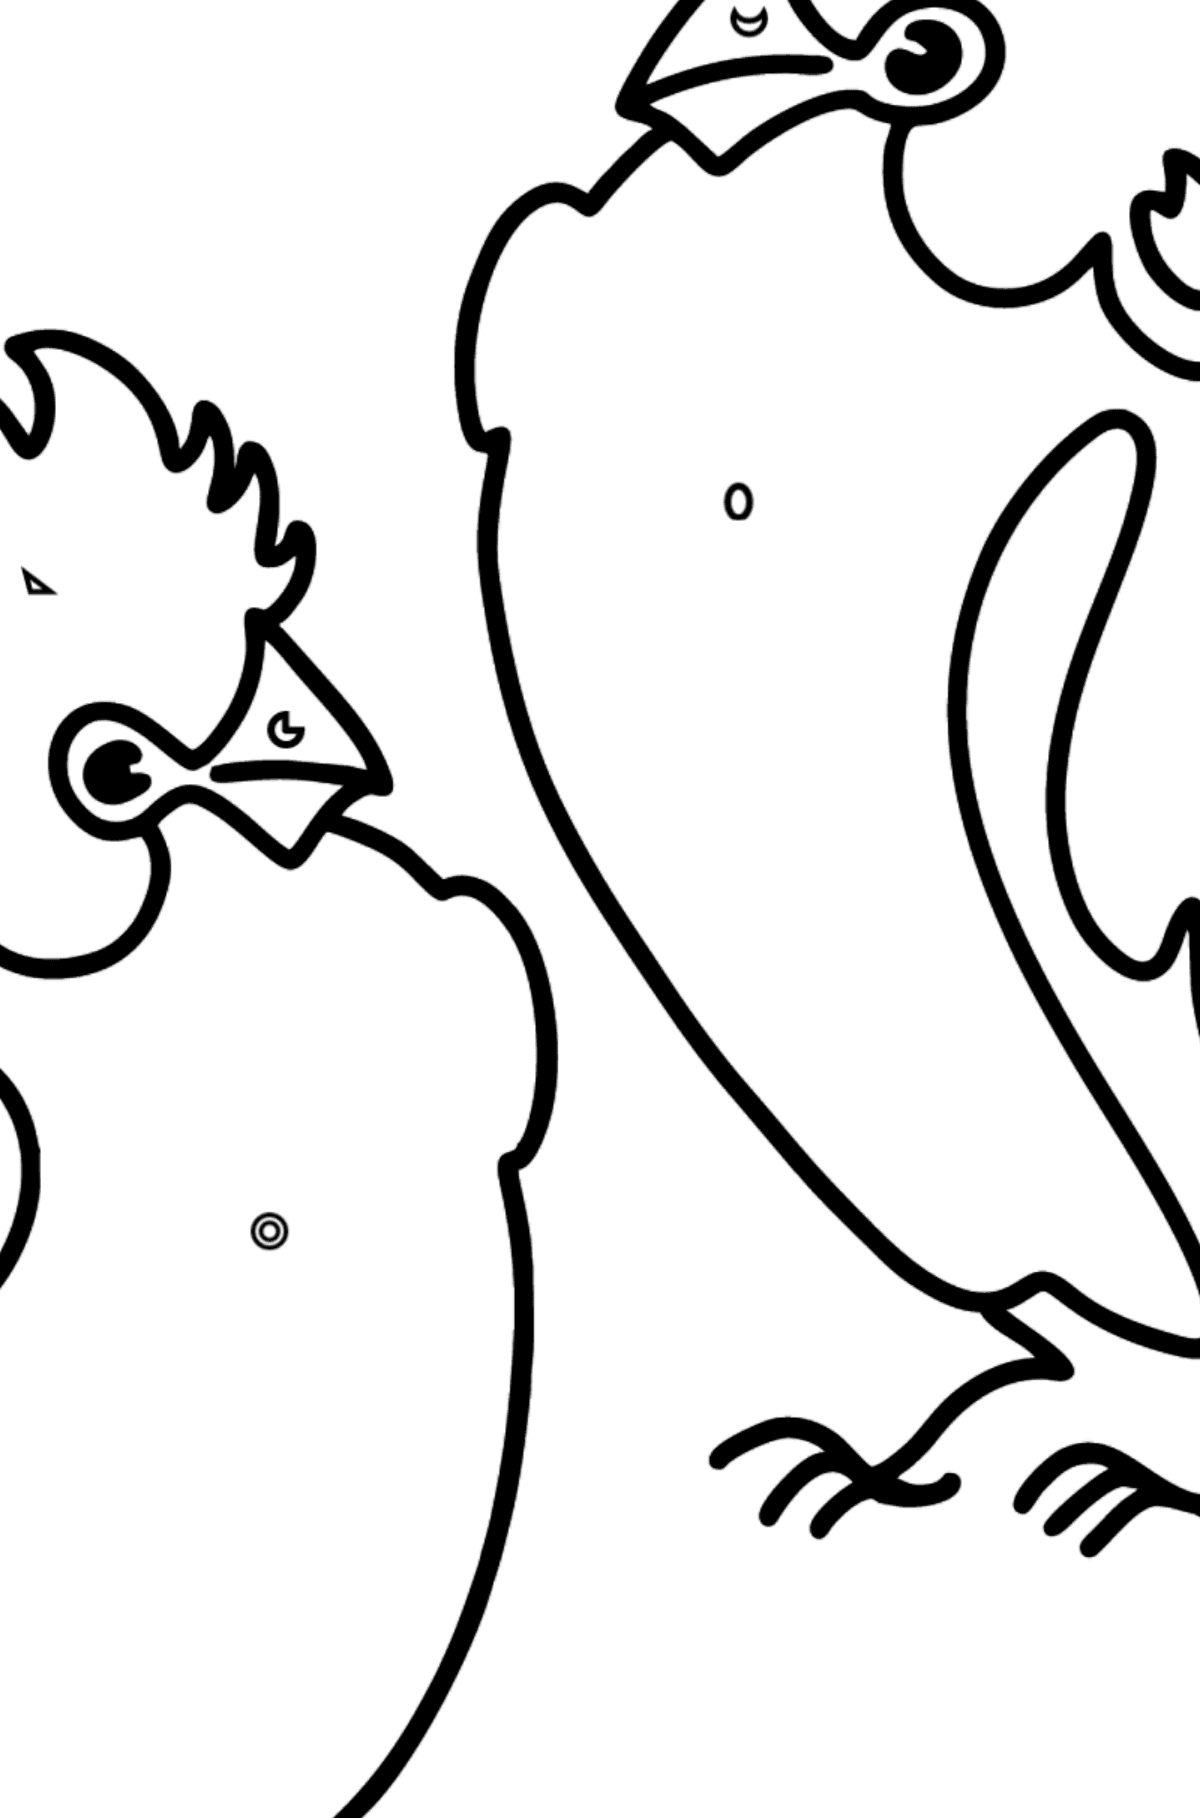 2 Parrots coloring page - Coloring by Geometric Shapes for Kids